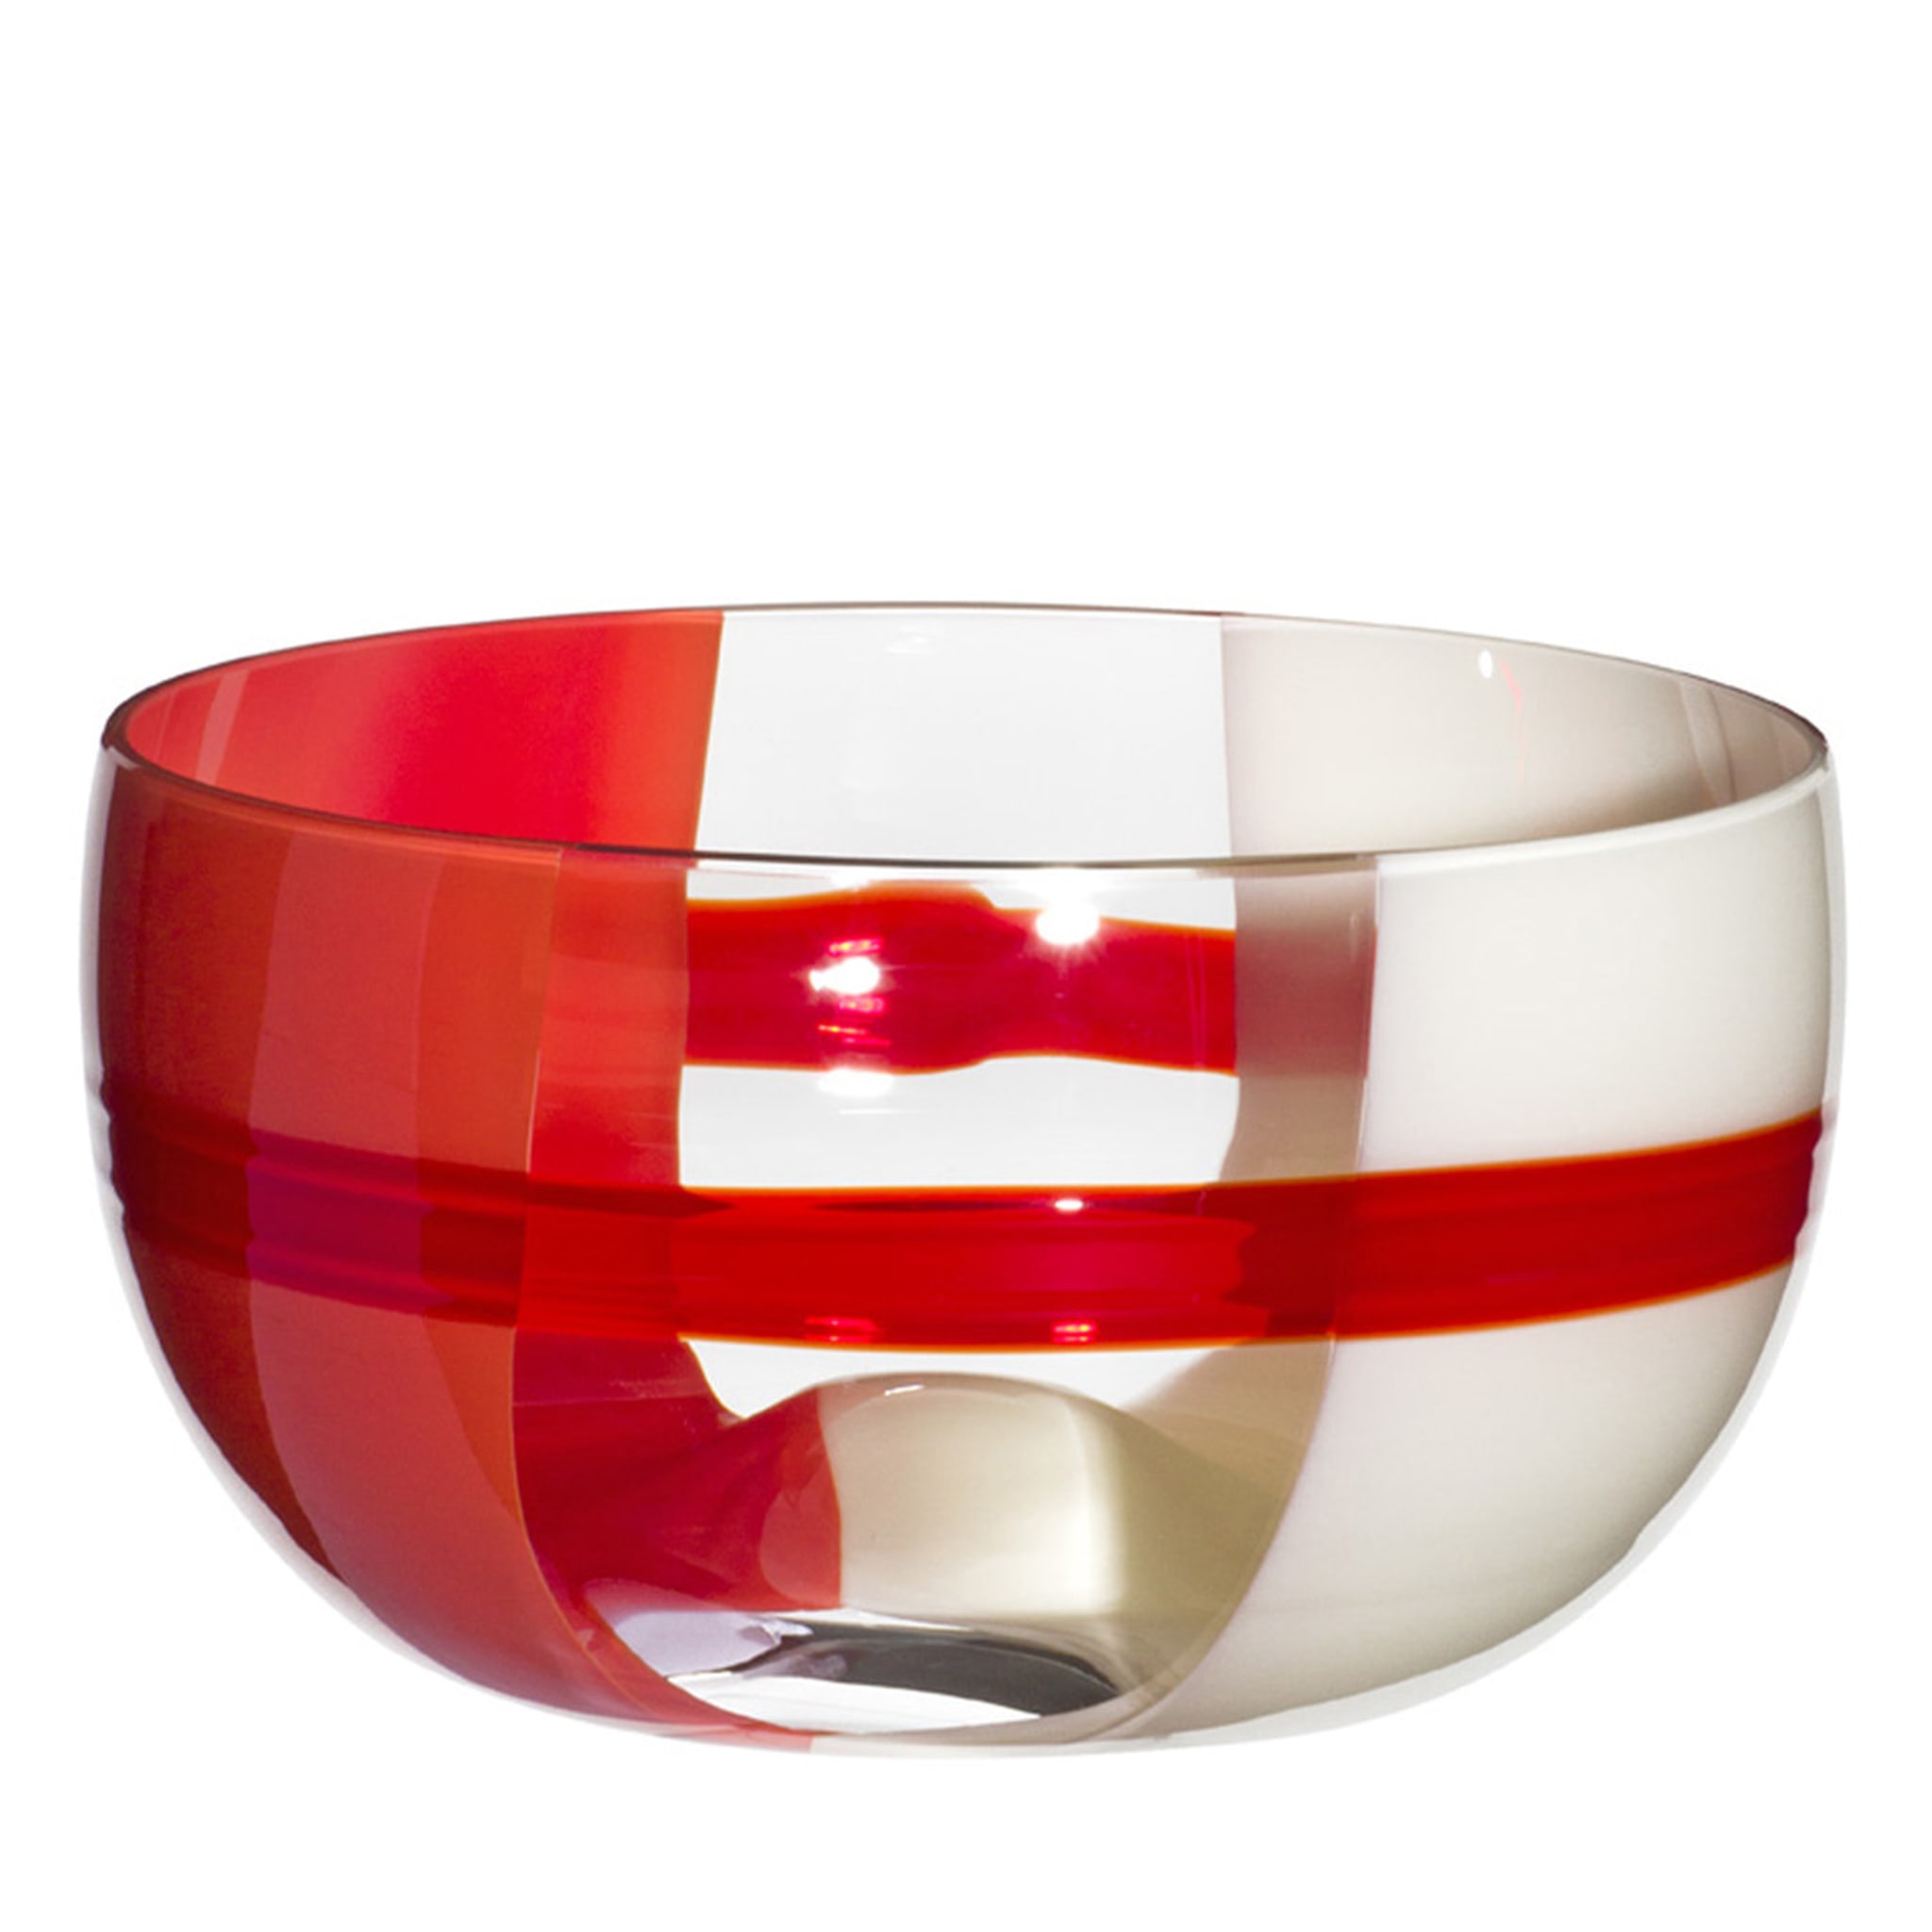 Mignon Red and White Bowl #1 - Main view